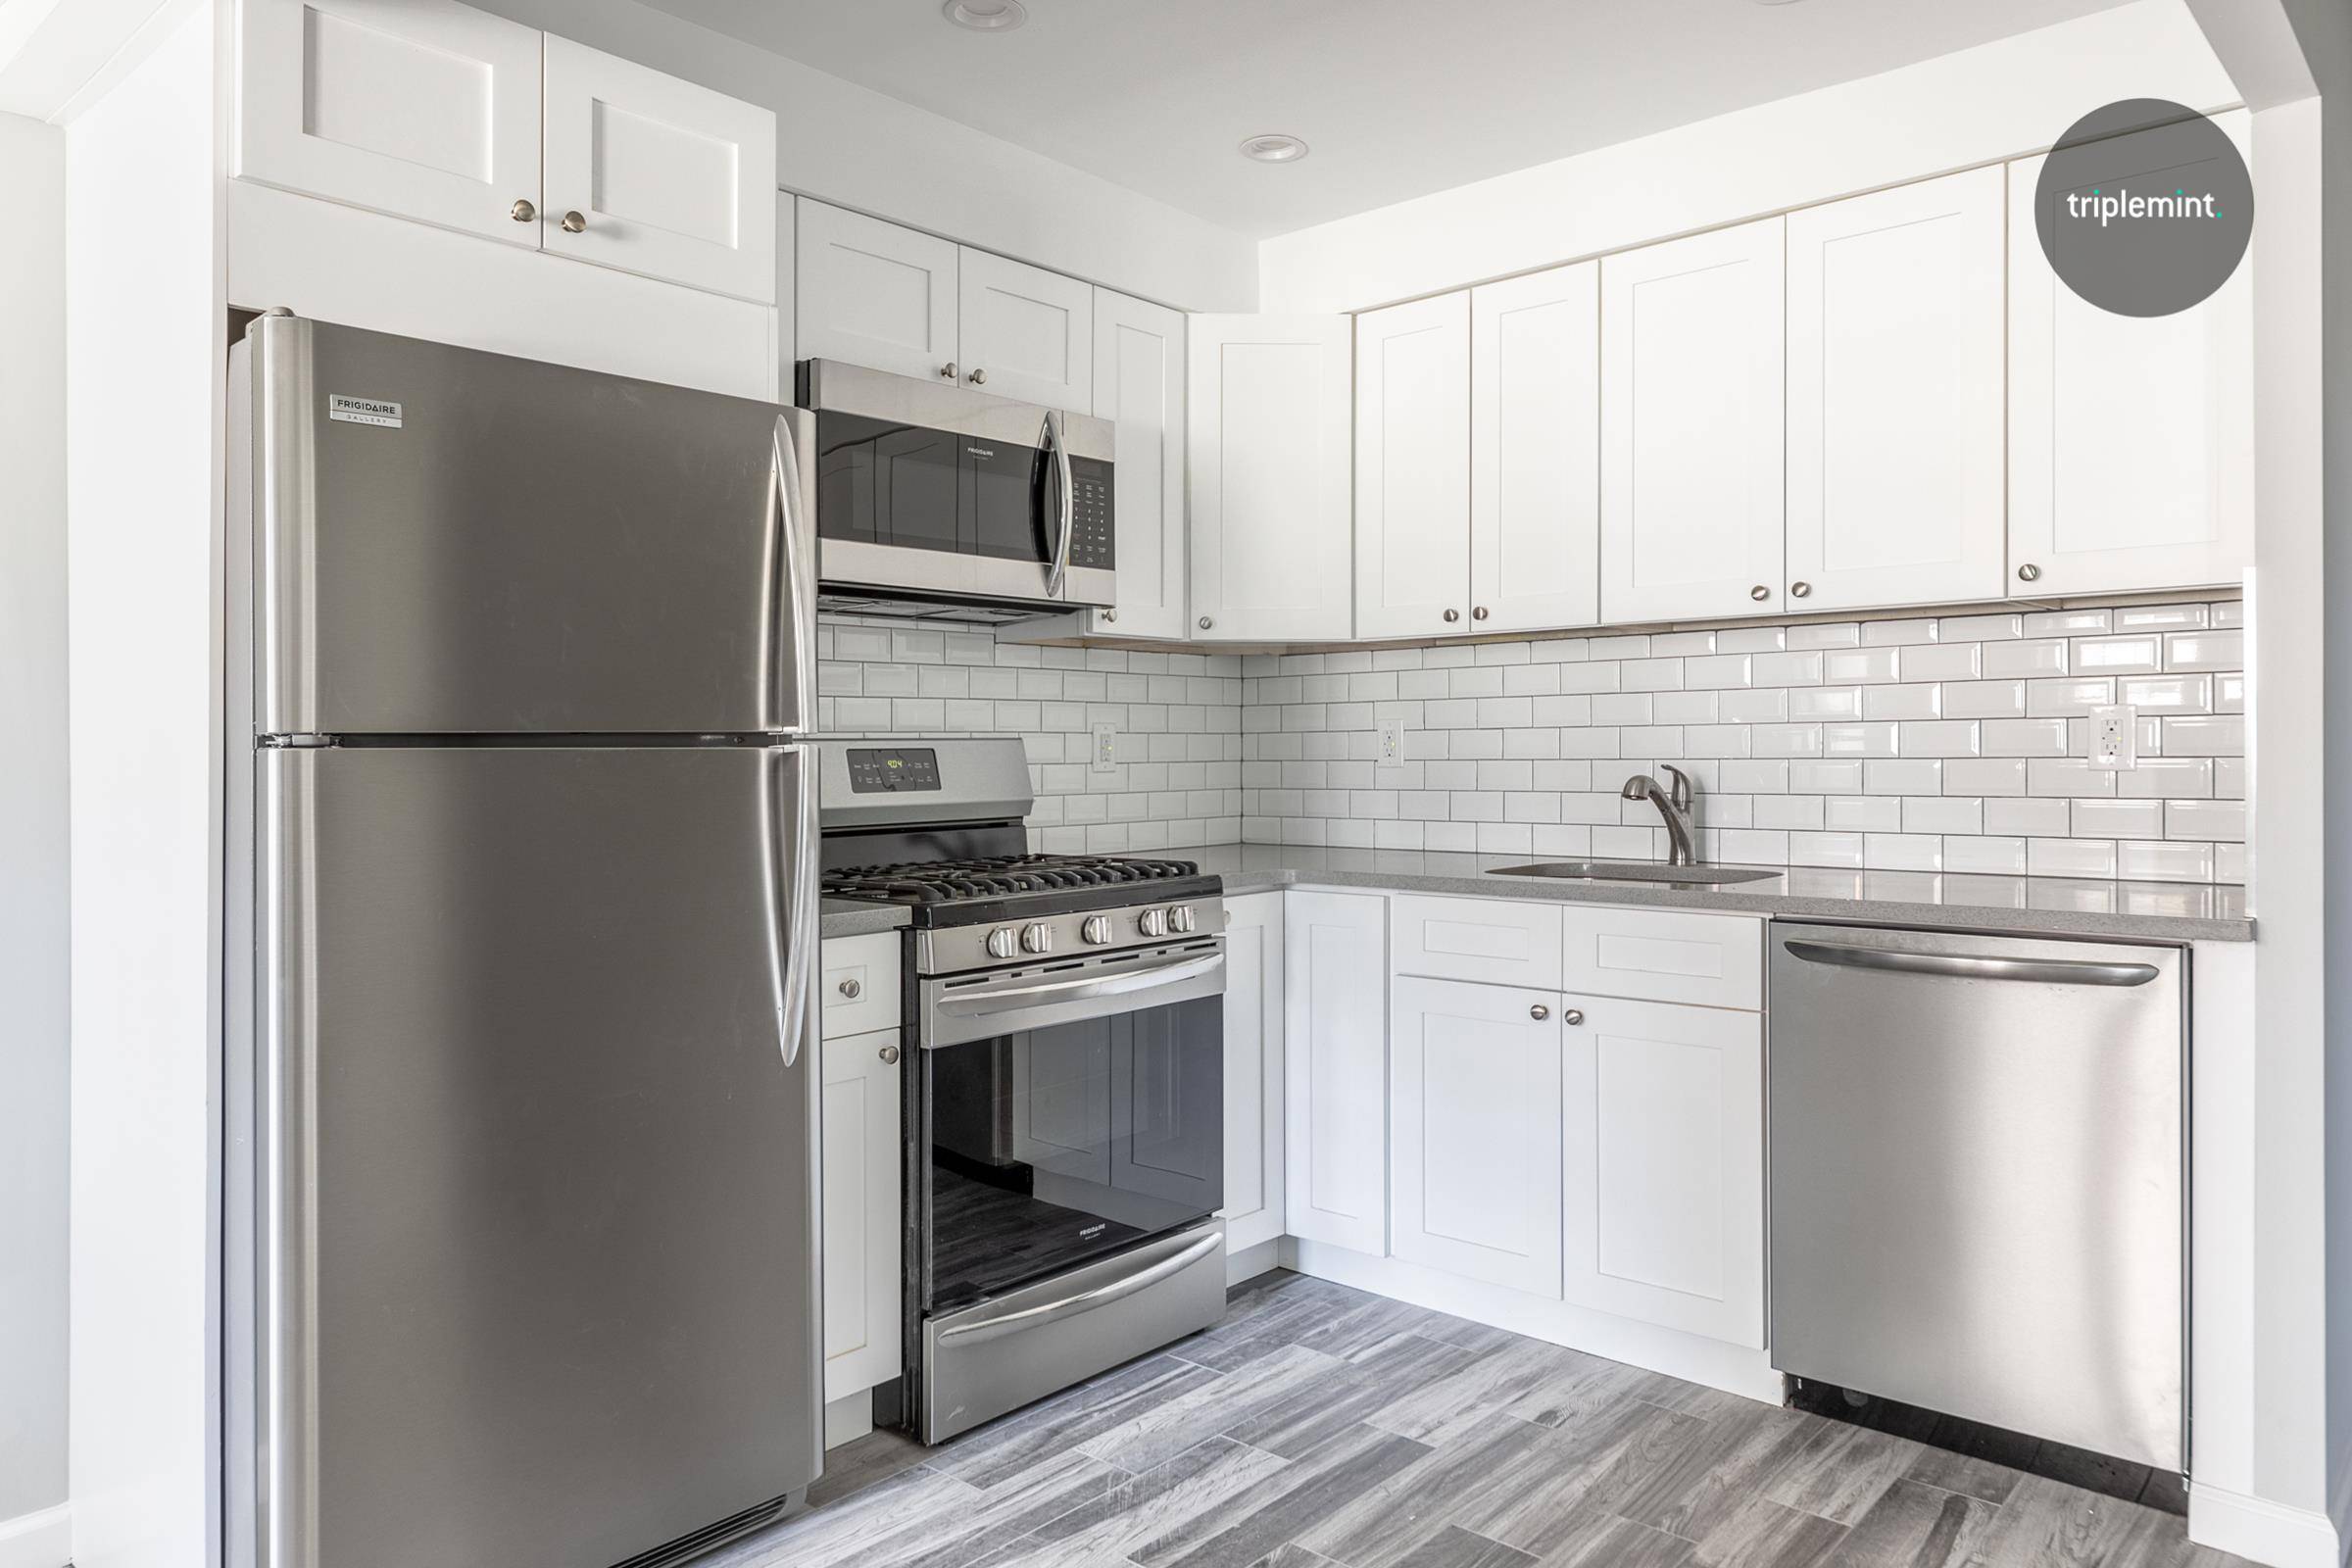 This is a stunning 1BR apartment in the heart of Astoria with all of the amenities you could want.